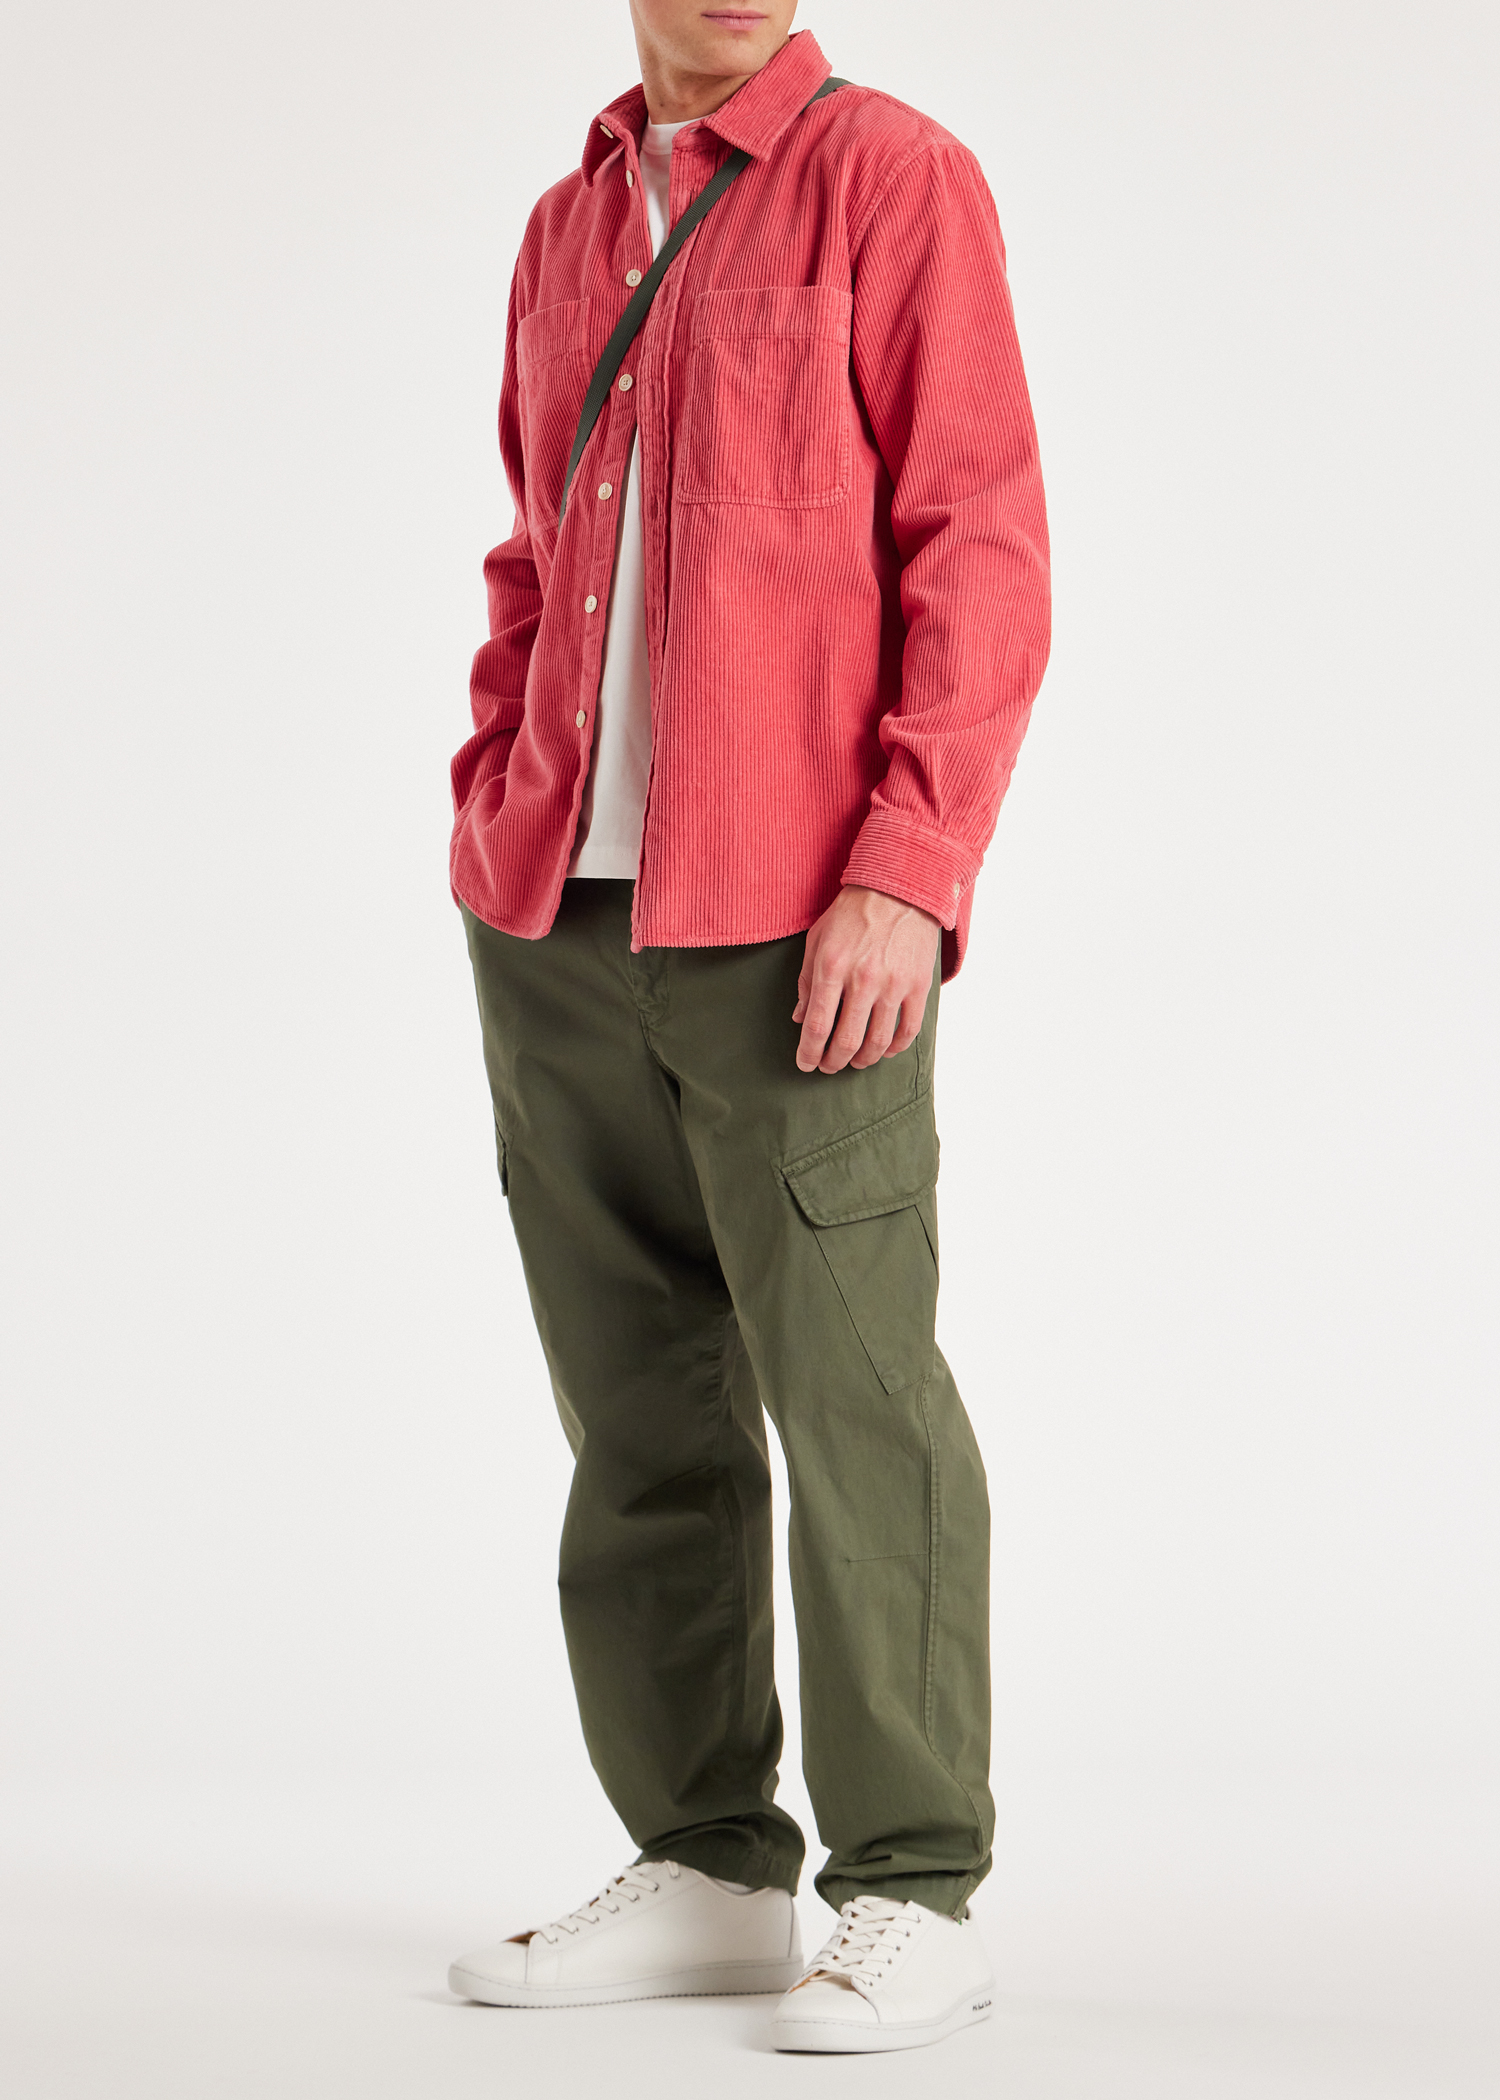 PS Paul Smith Green Stretch-Cotton Work Pants